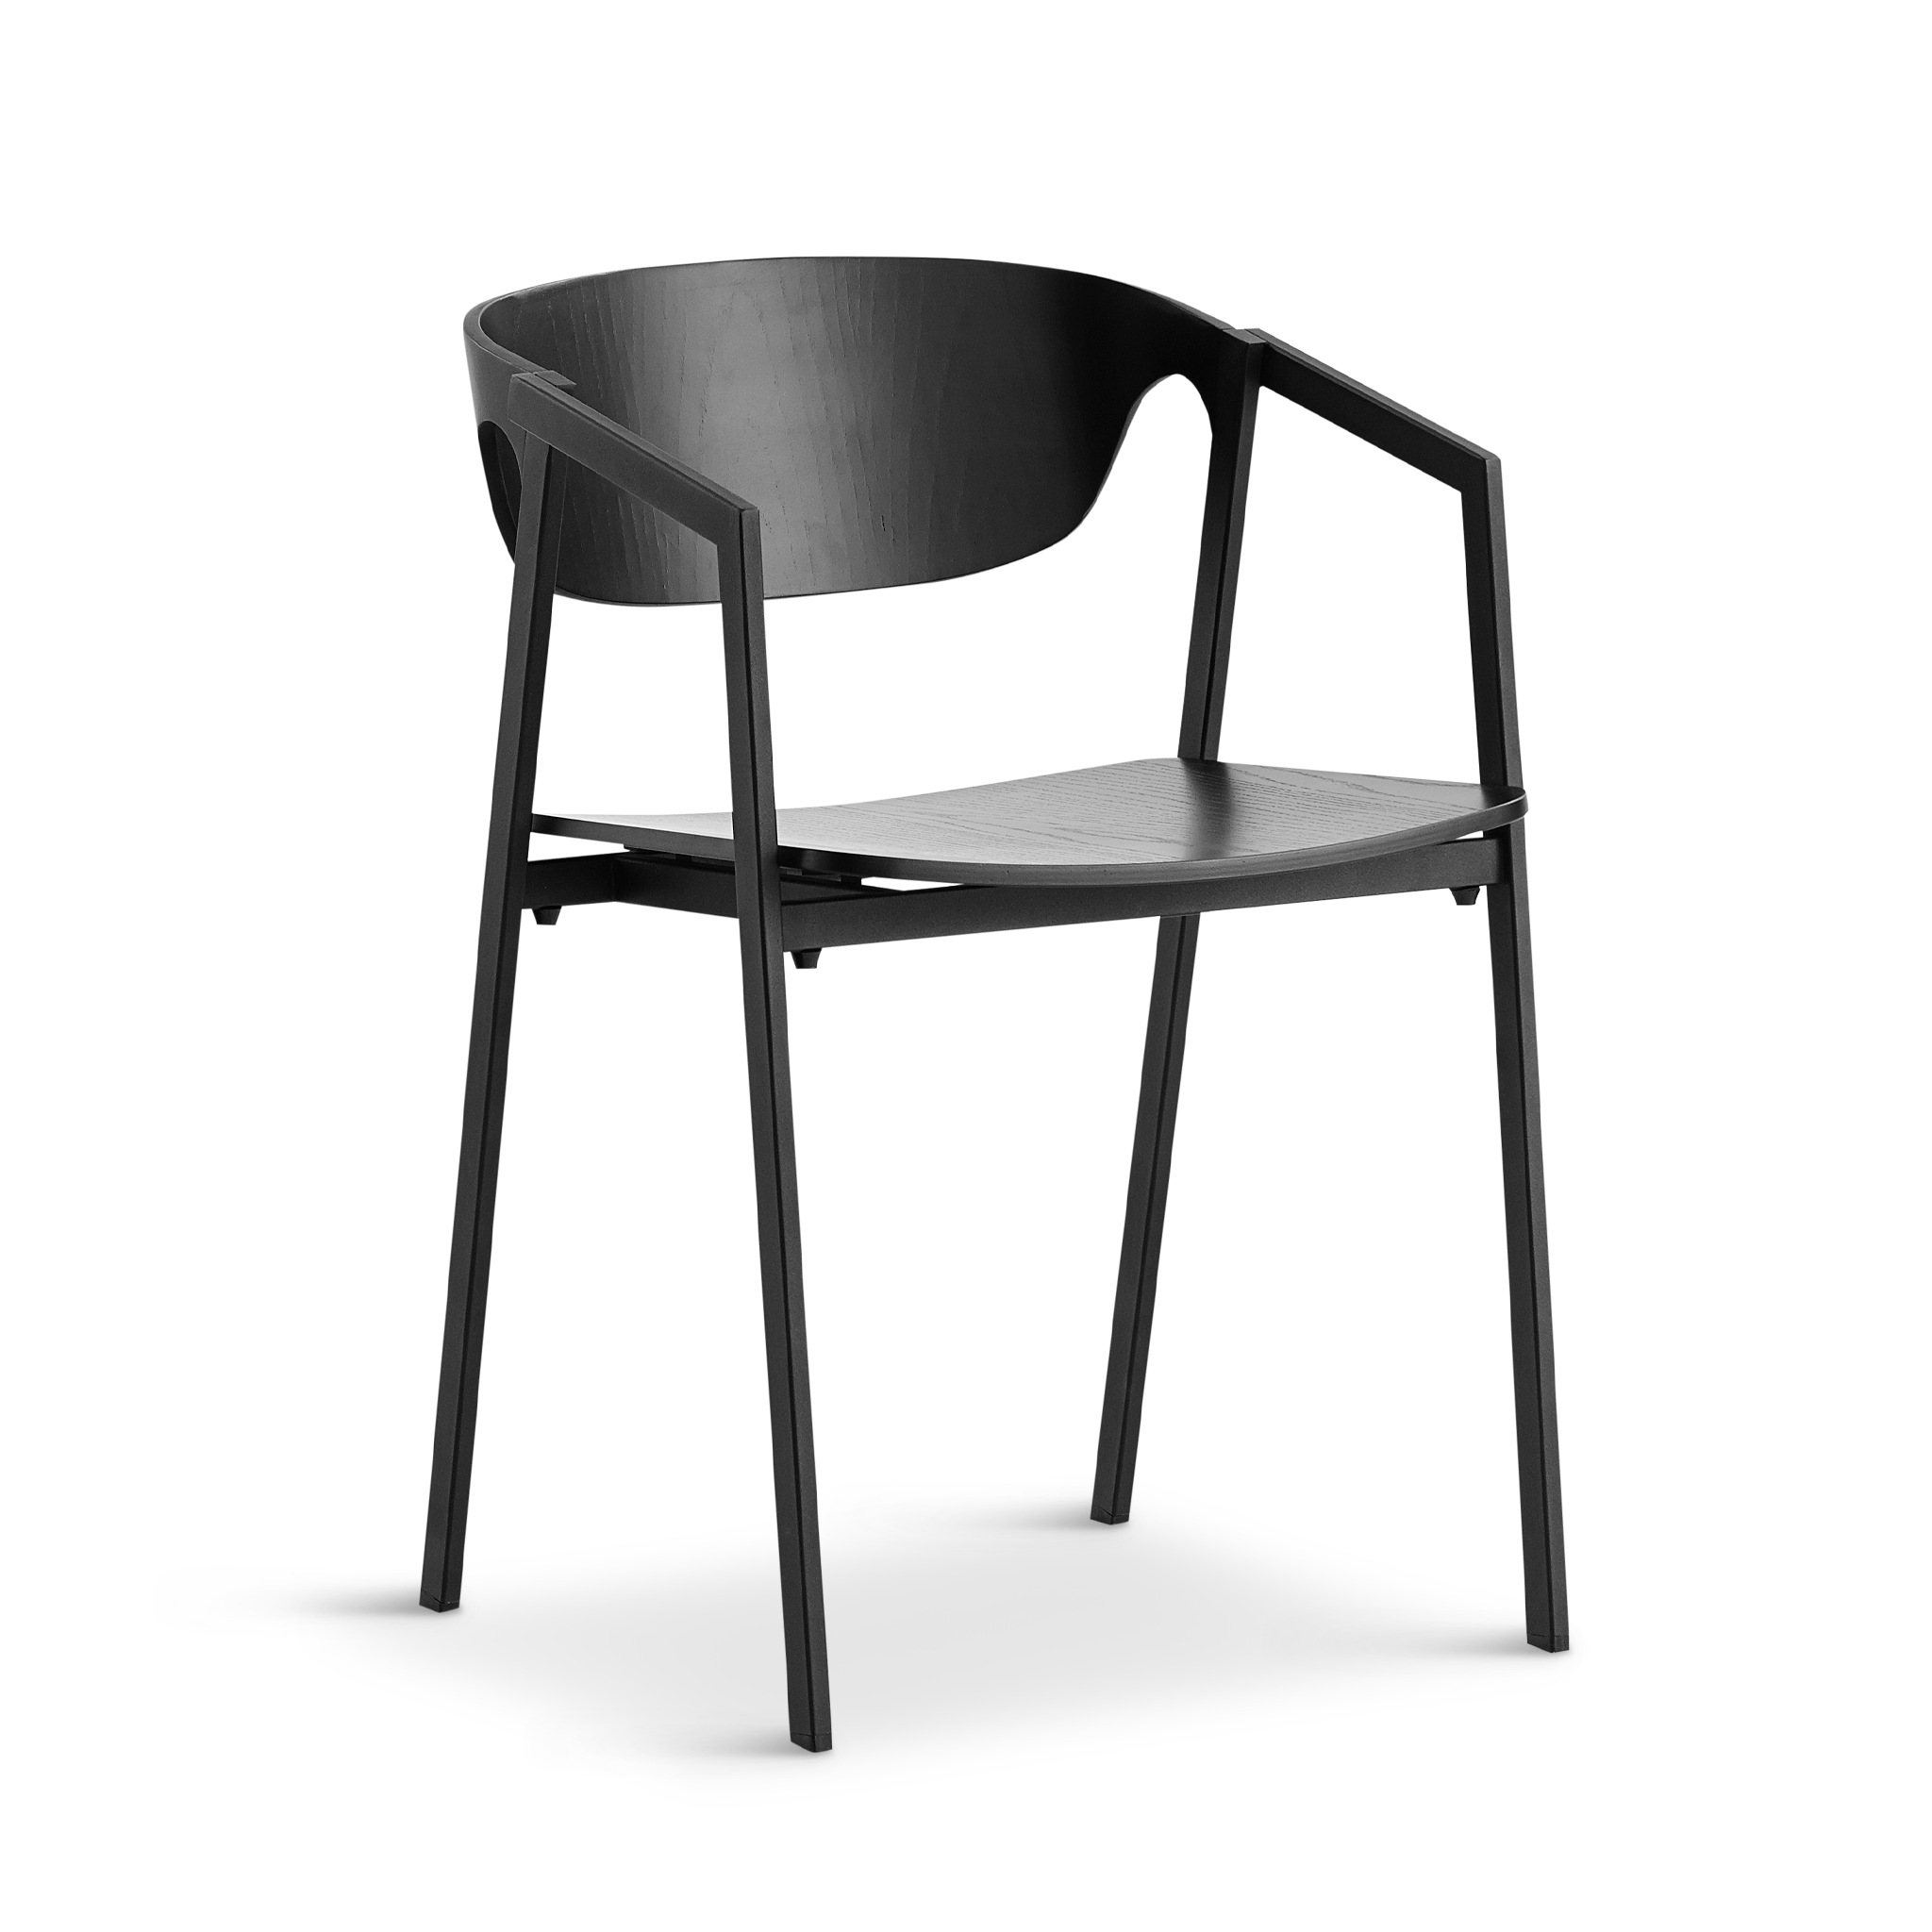 WOUD -  S.A.C. dining chair - Black